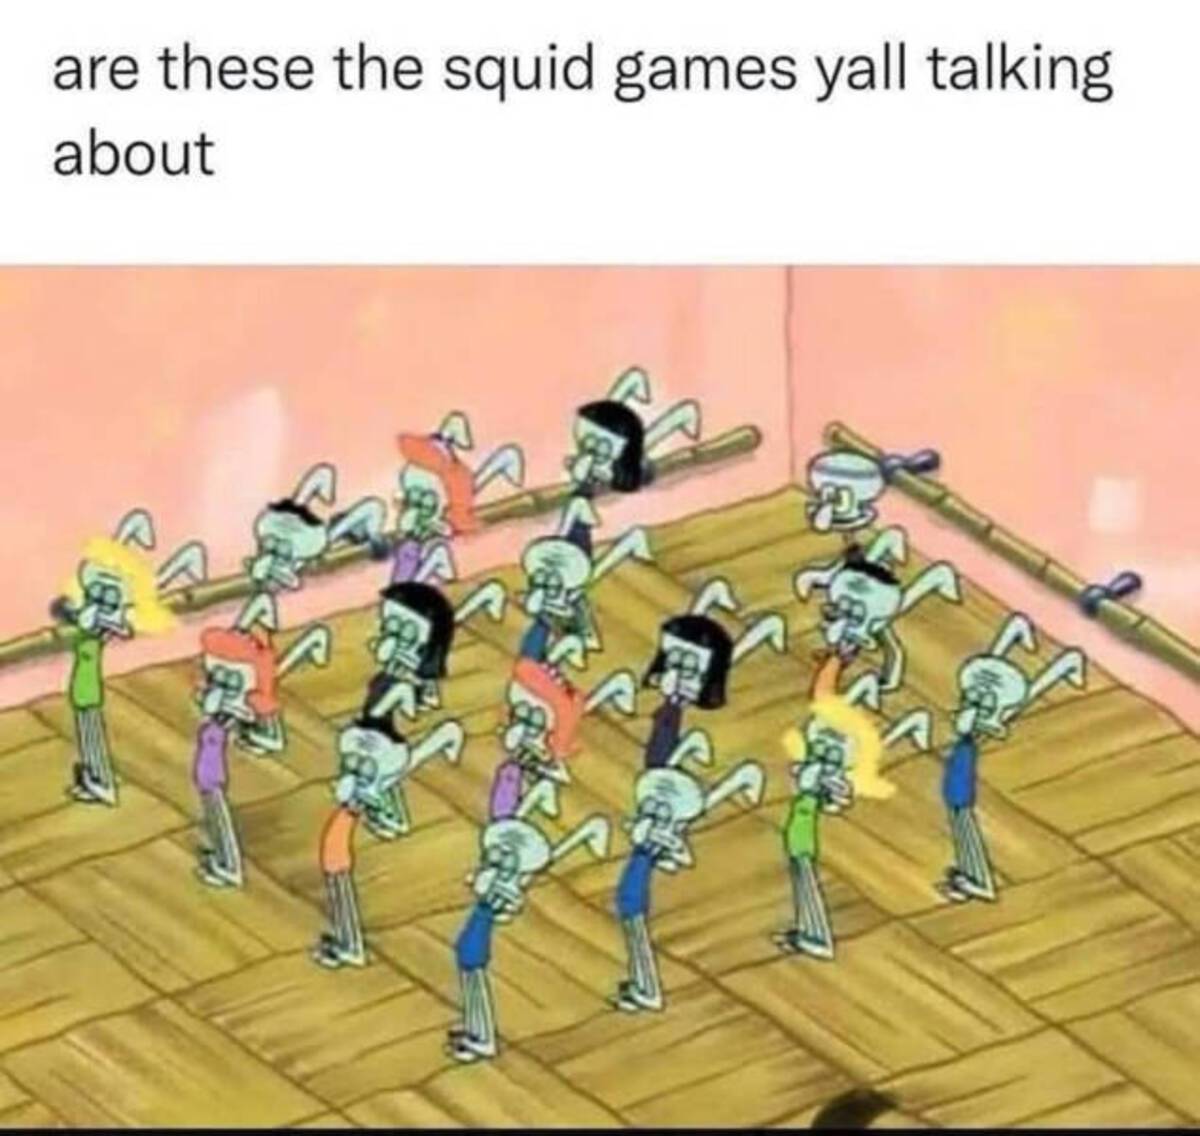 squid game spongebob - are these the squid games yall talking about